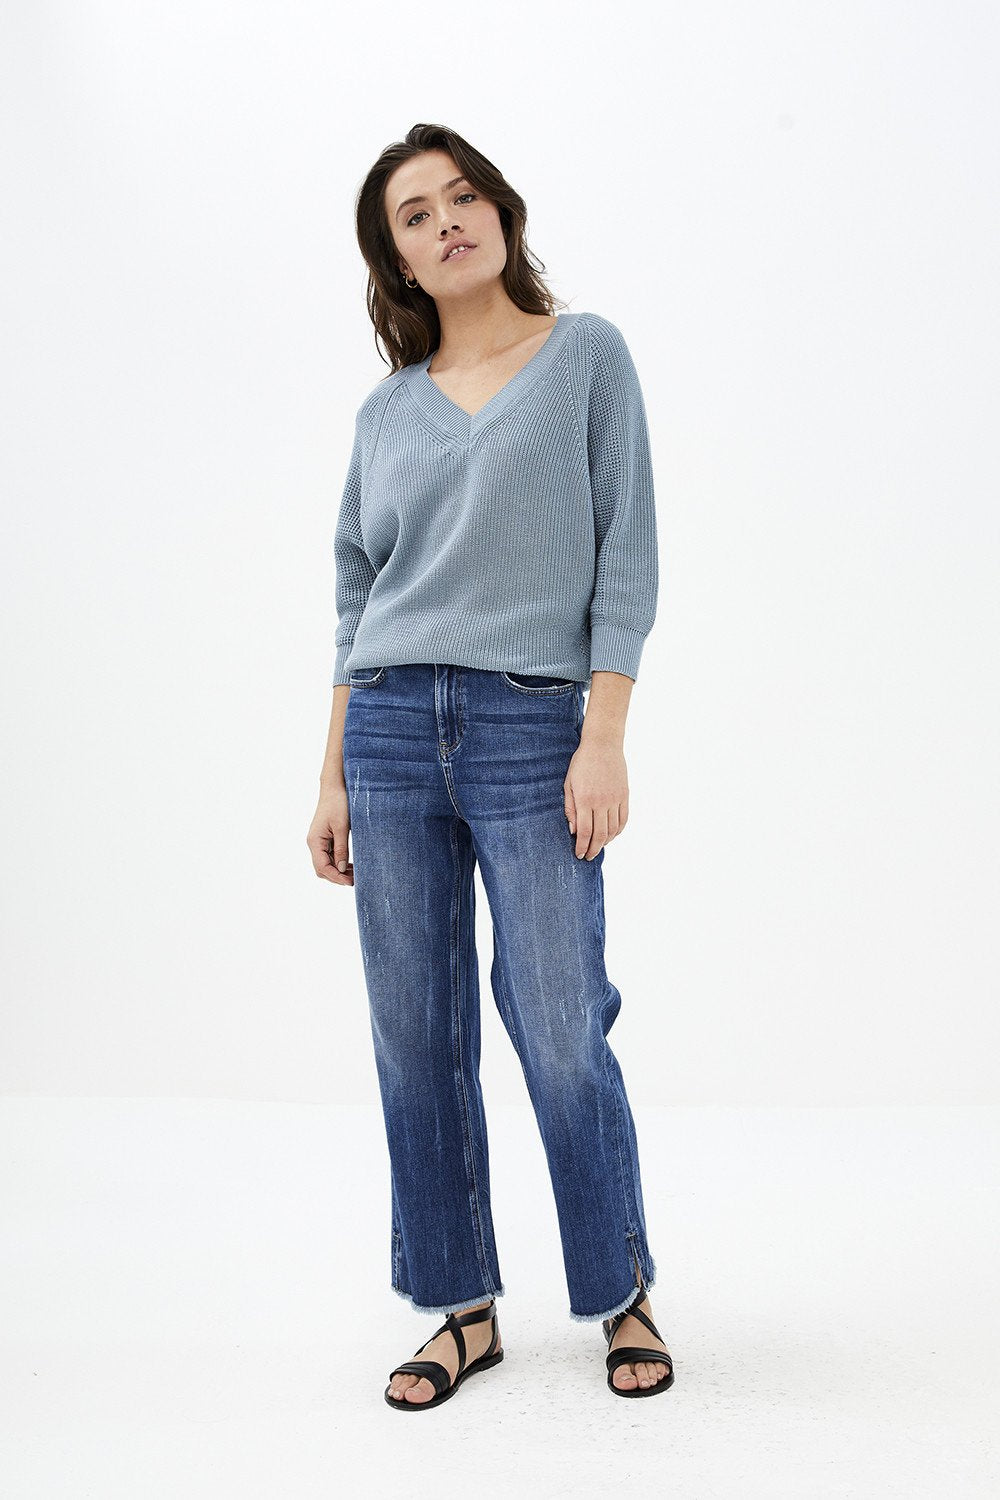 By-Bar - new lune cloud blue pullover cotton